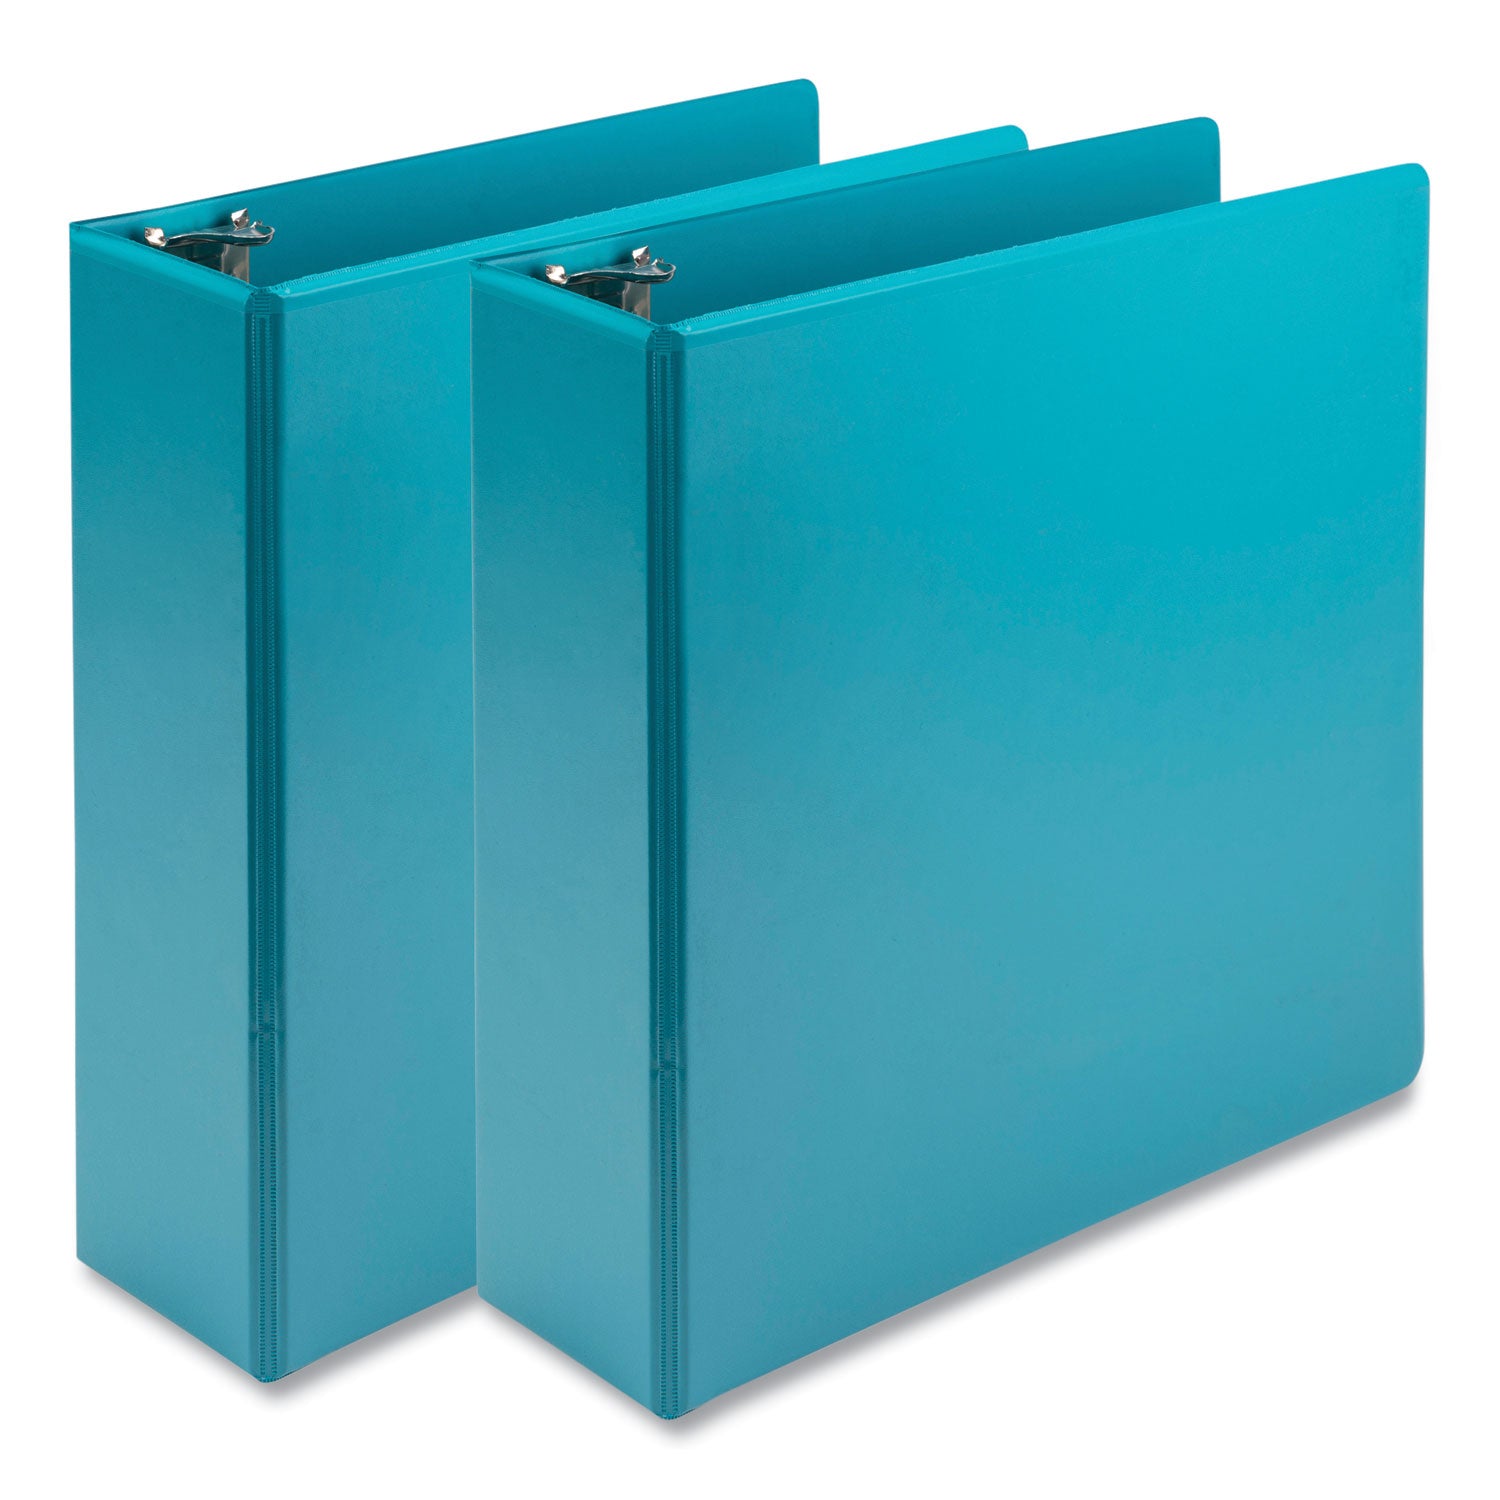 earths-choice-plant-based-economy-round-ring-view-binders-3-rings-3-capacity-11-x-85-teal-2-pack_samu86877 - 1